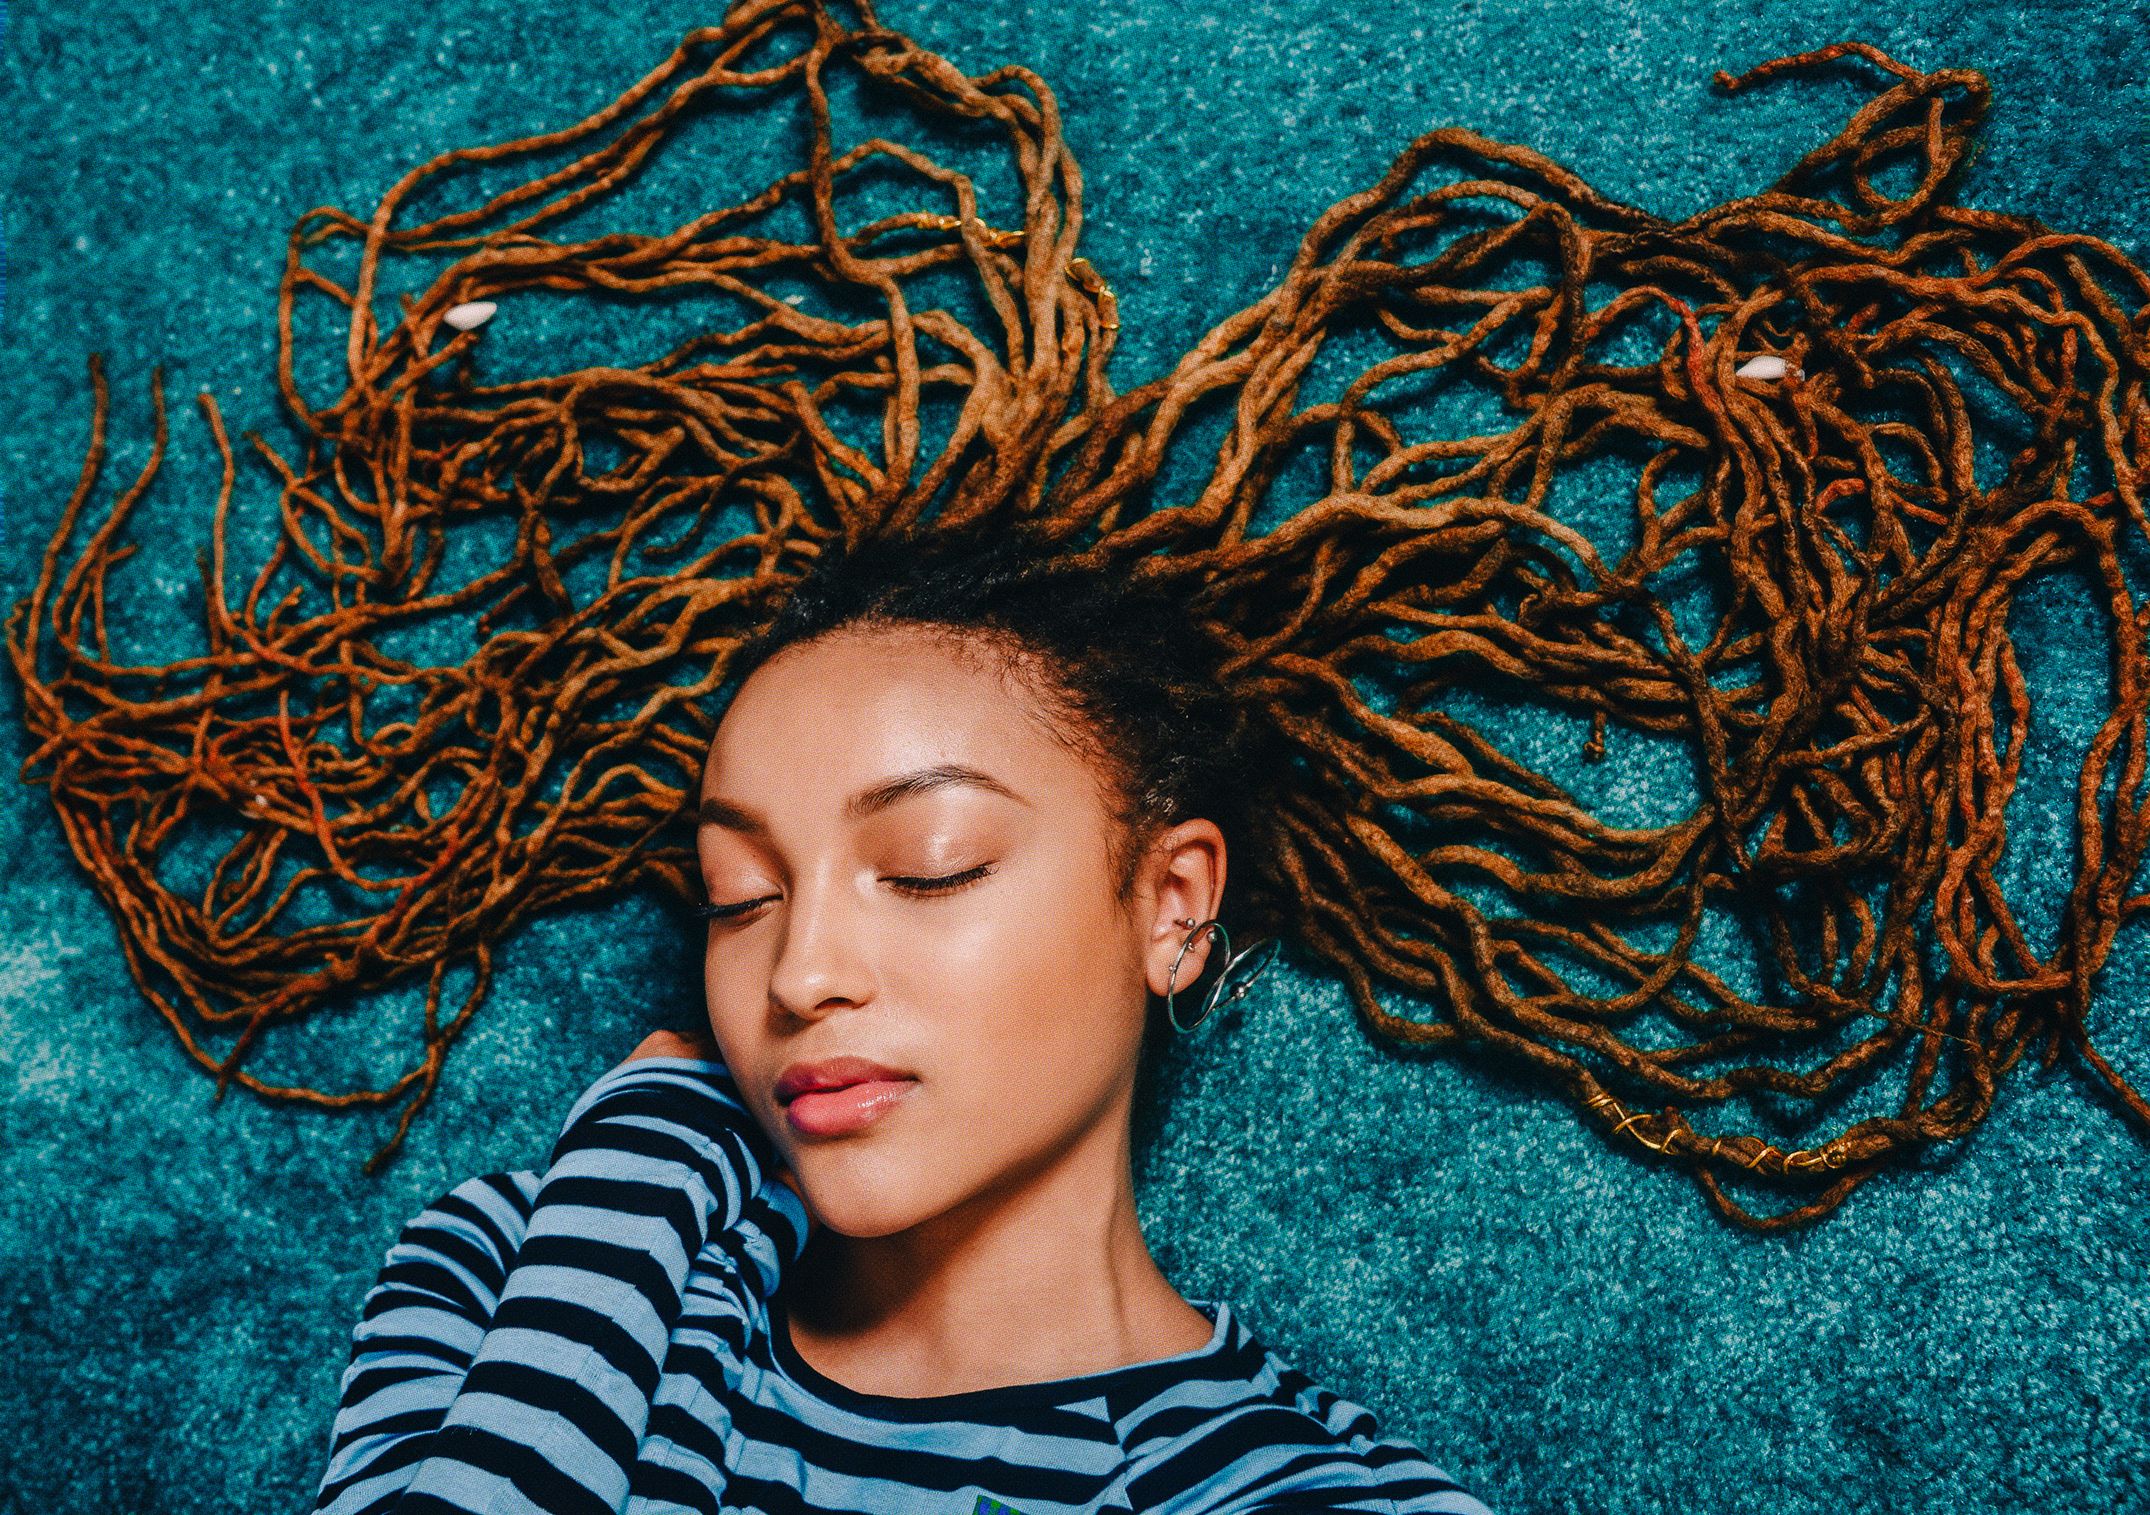 Make a DIY dreadlock shampoo for clean and light weight dreads!